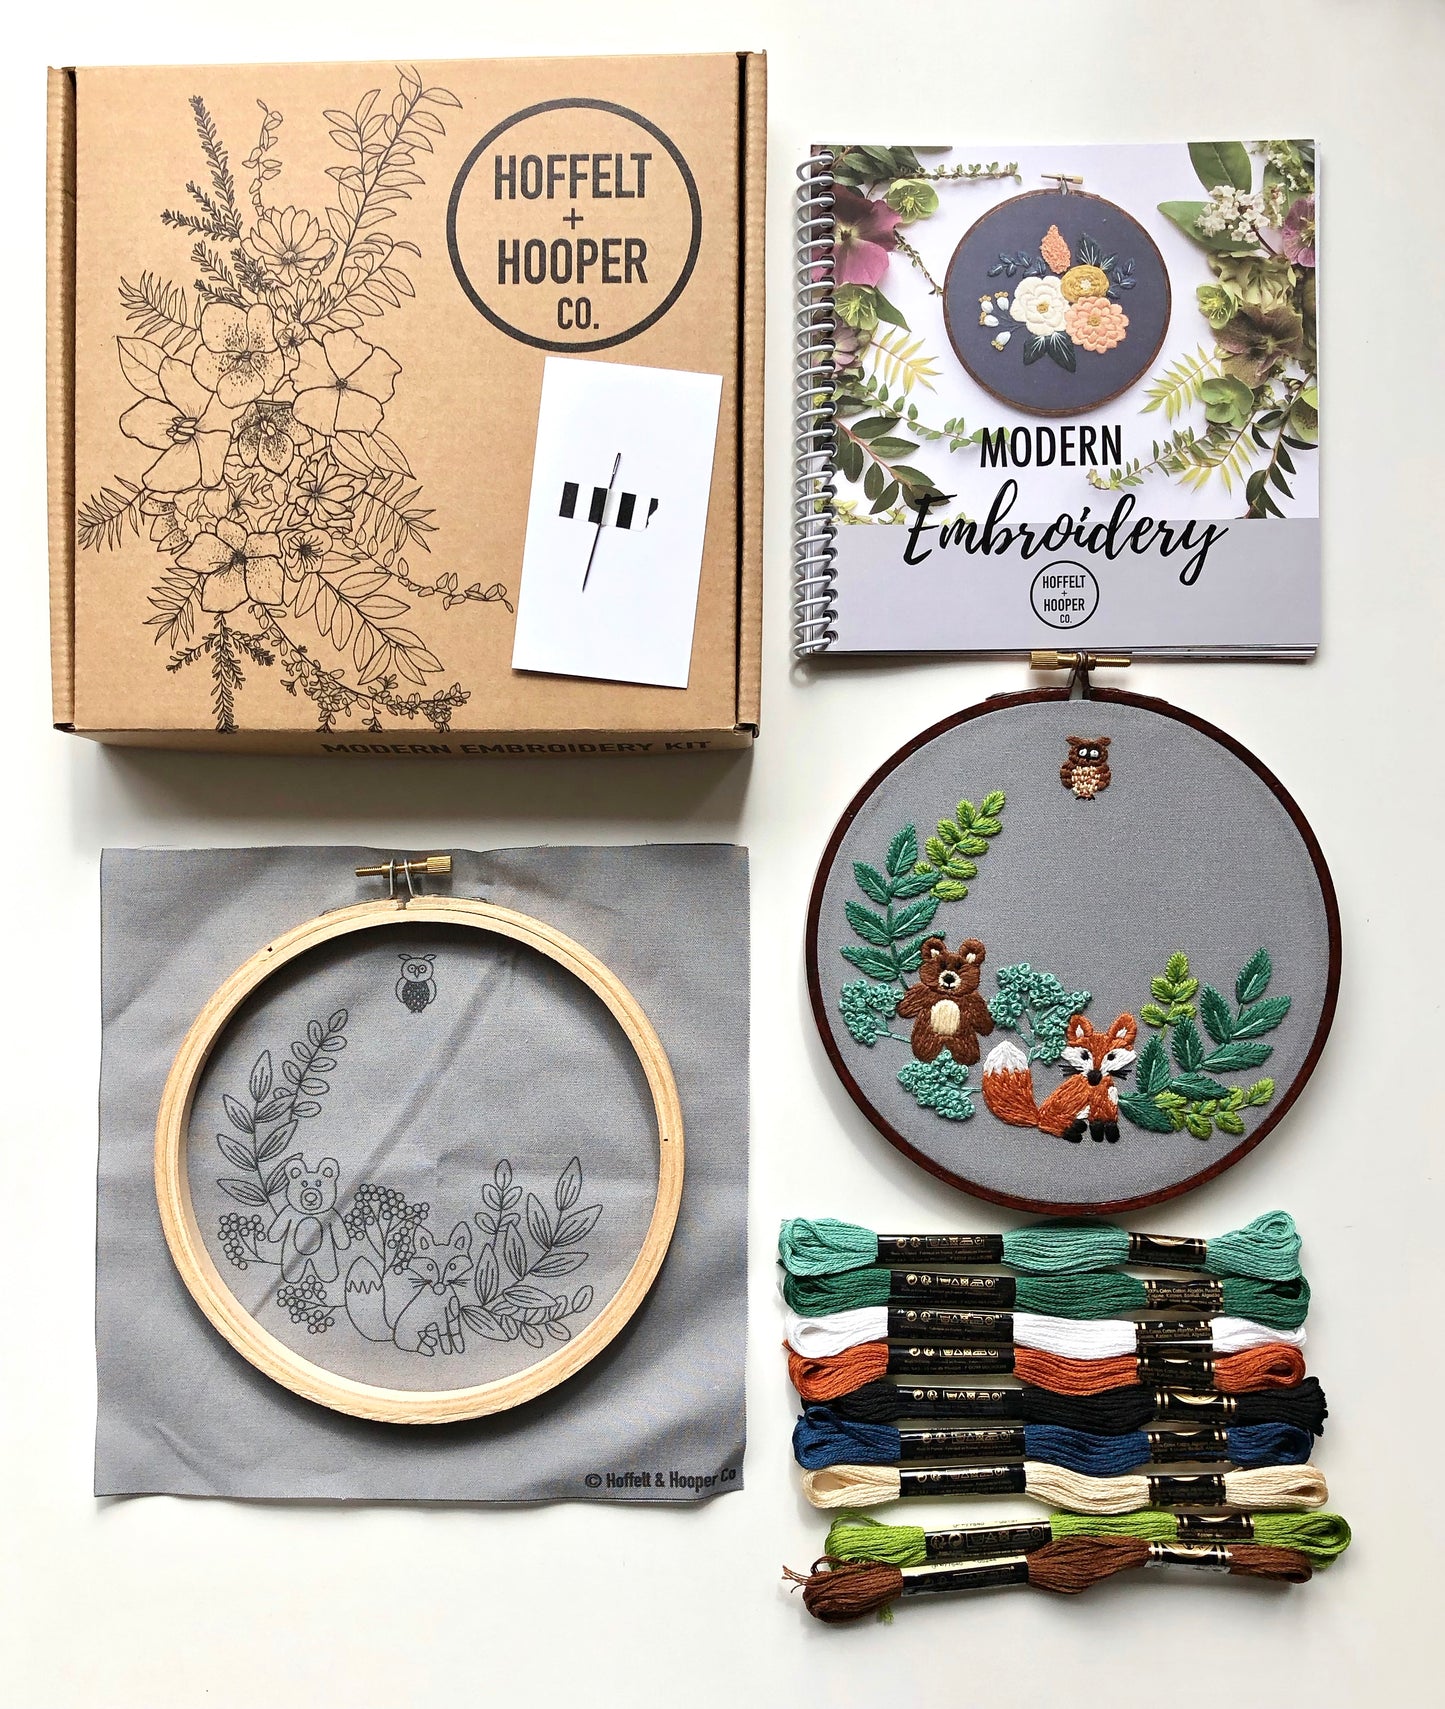 Hand Embroidery Kit - Wilderness Mates in Gray